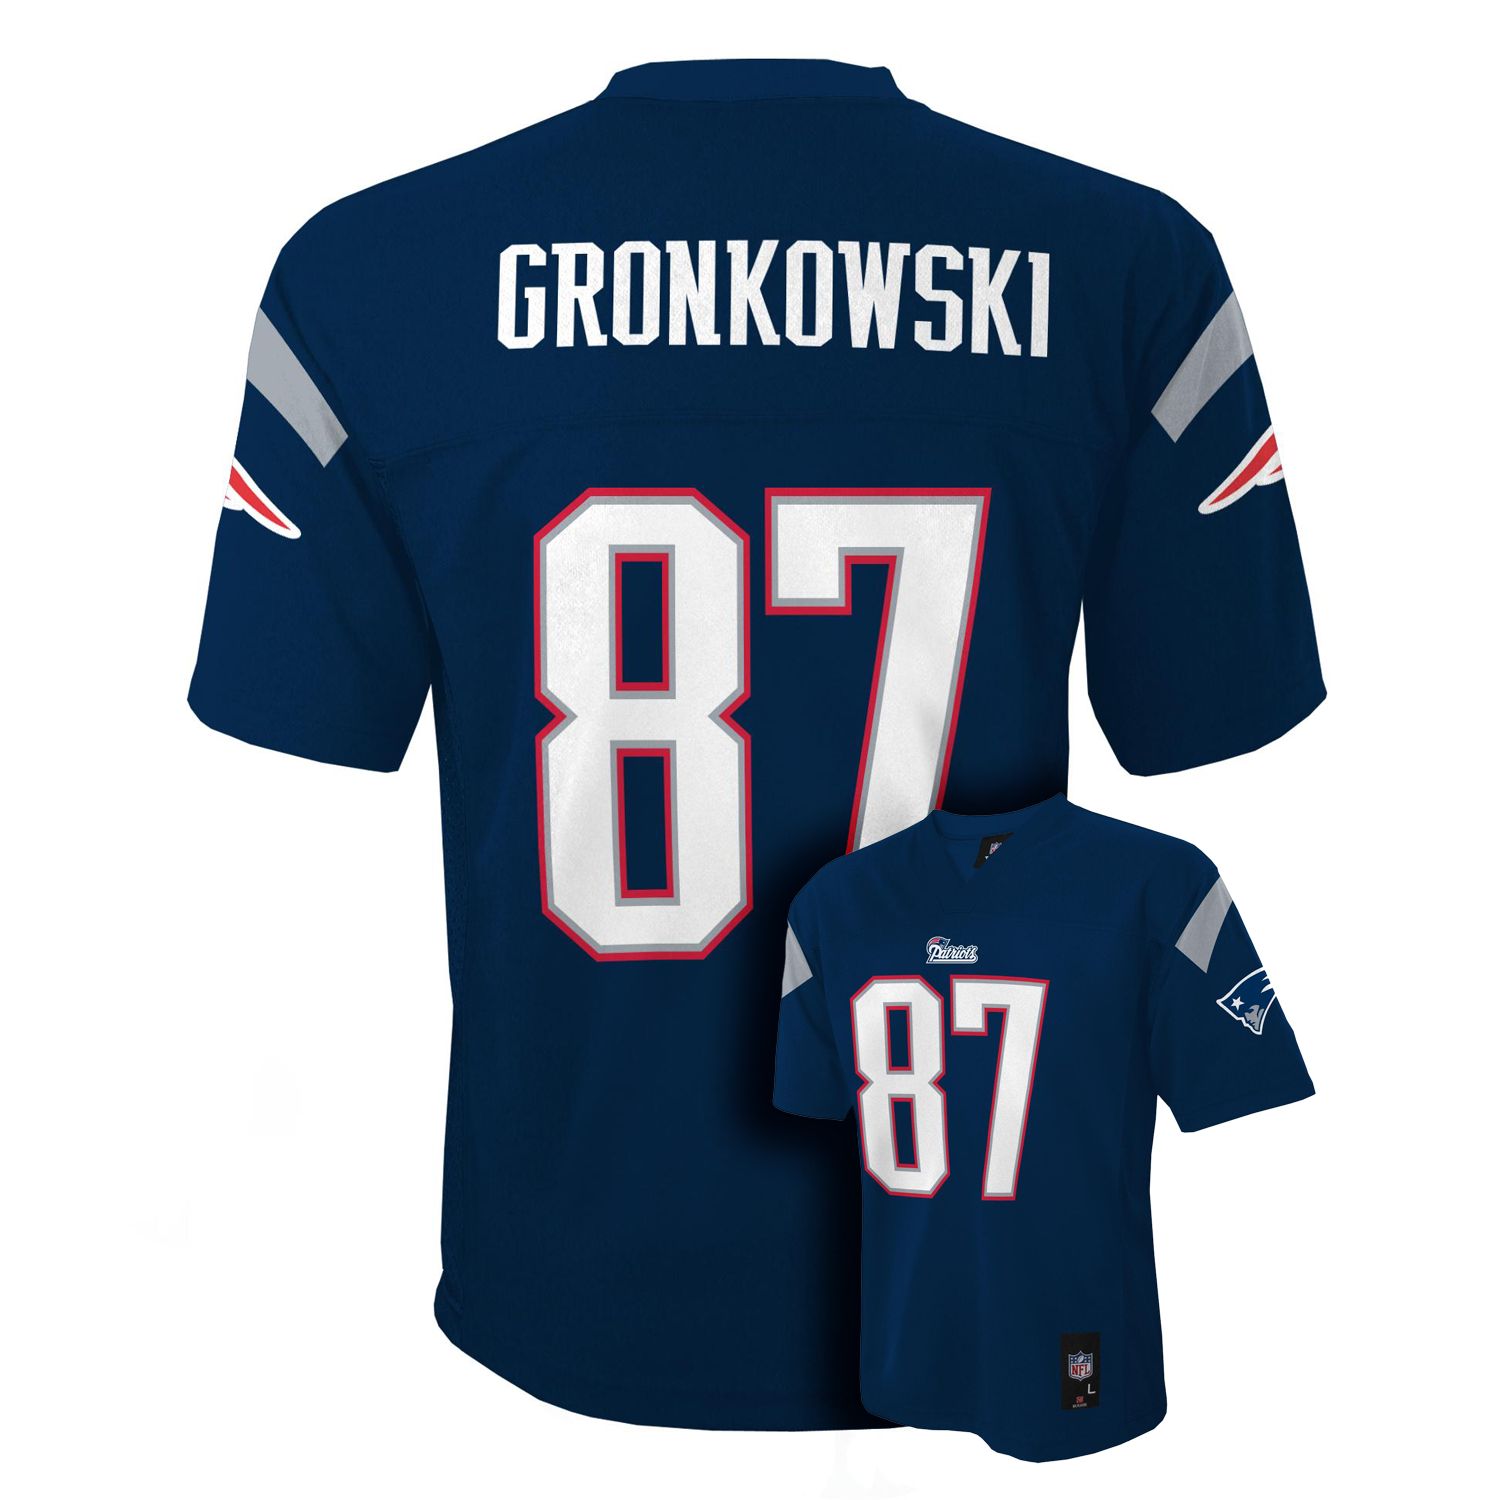 pink gronk jersey